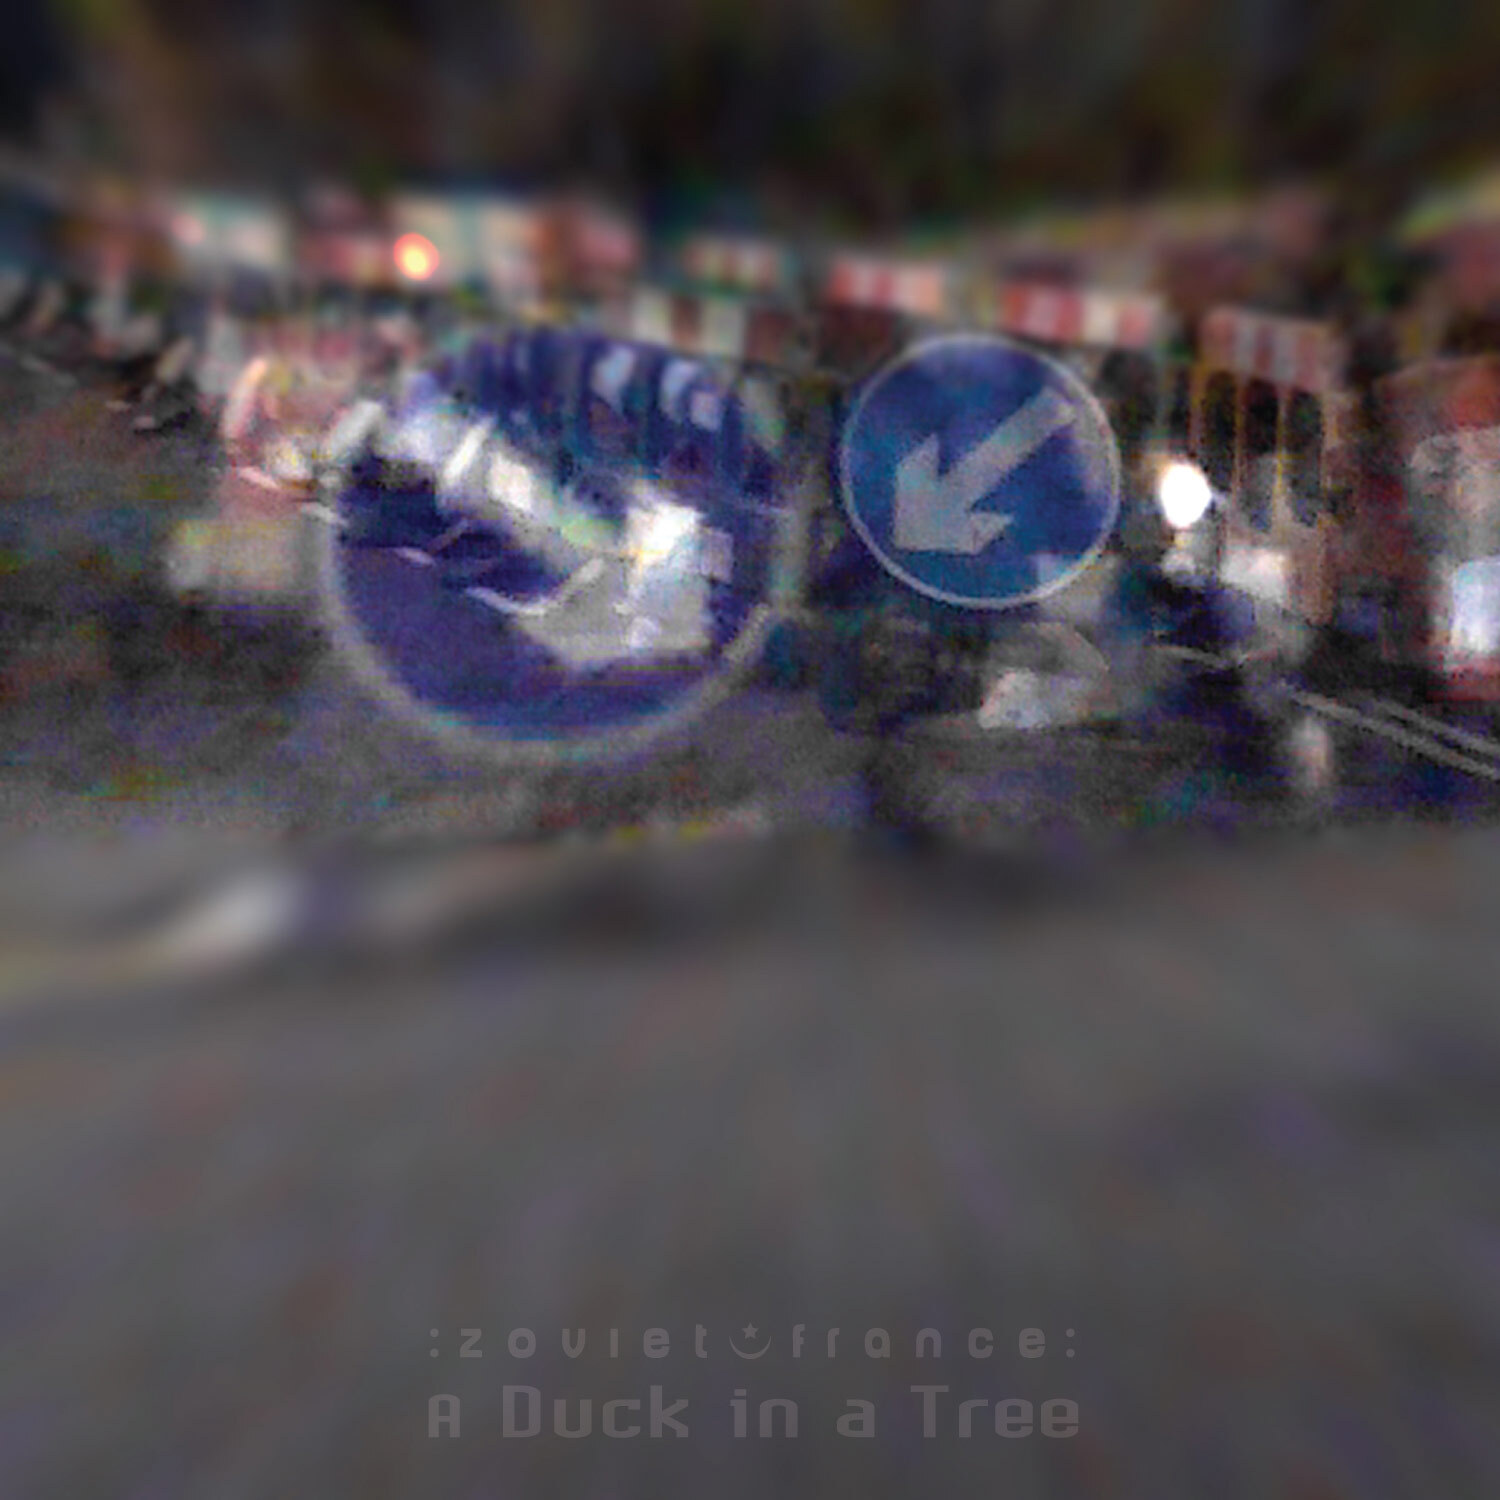 A-Duck-in-a-Tree-2018-09-01-_-Sensate-Surround-cover-1500.jpg